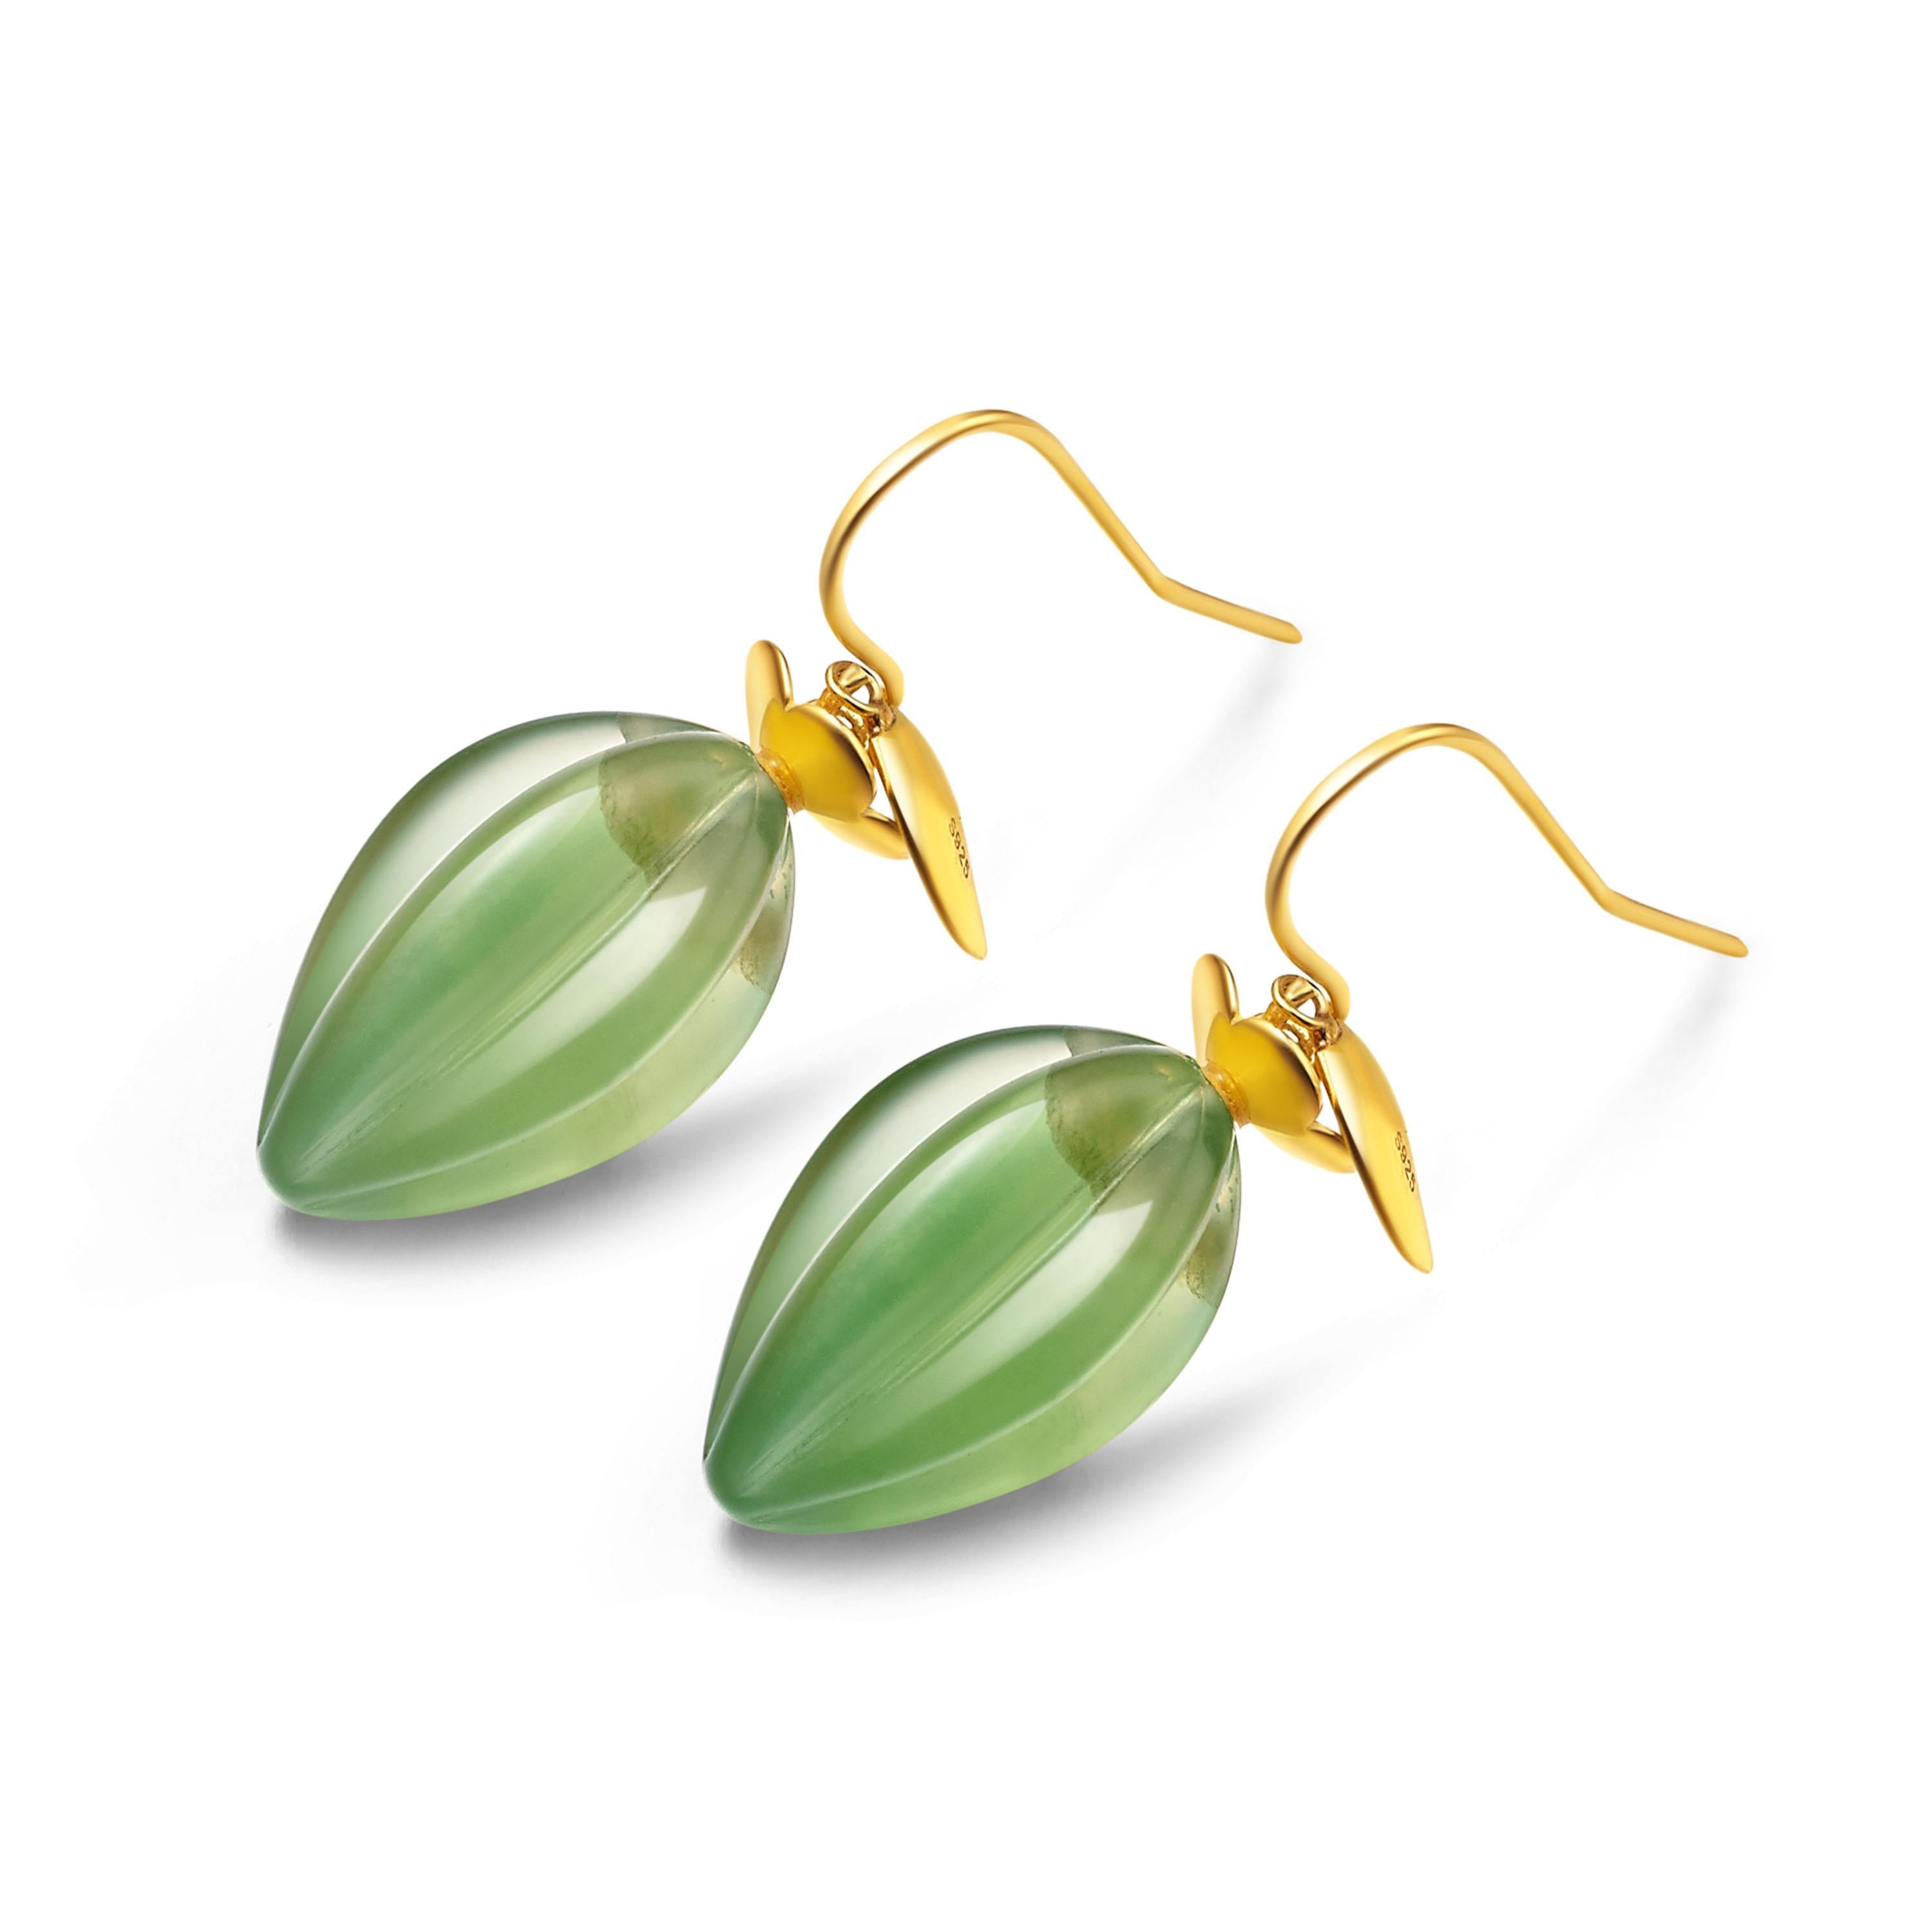 A charming pair of earrings featuring serpentine jade shaped like the tropical star fruit, adorned with delicate petals of 18ct gold plate on sterling silver.

- Size (LxW): 28mm x 10mm
- Weight per earring: 3gm

Fei Liu Fine Jewellery is an